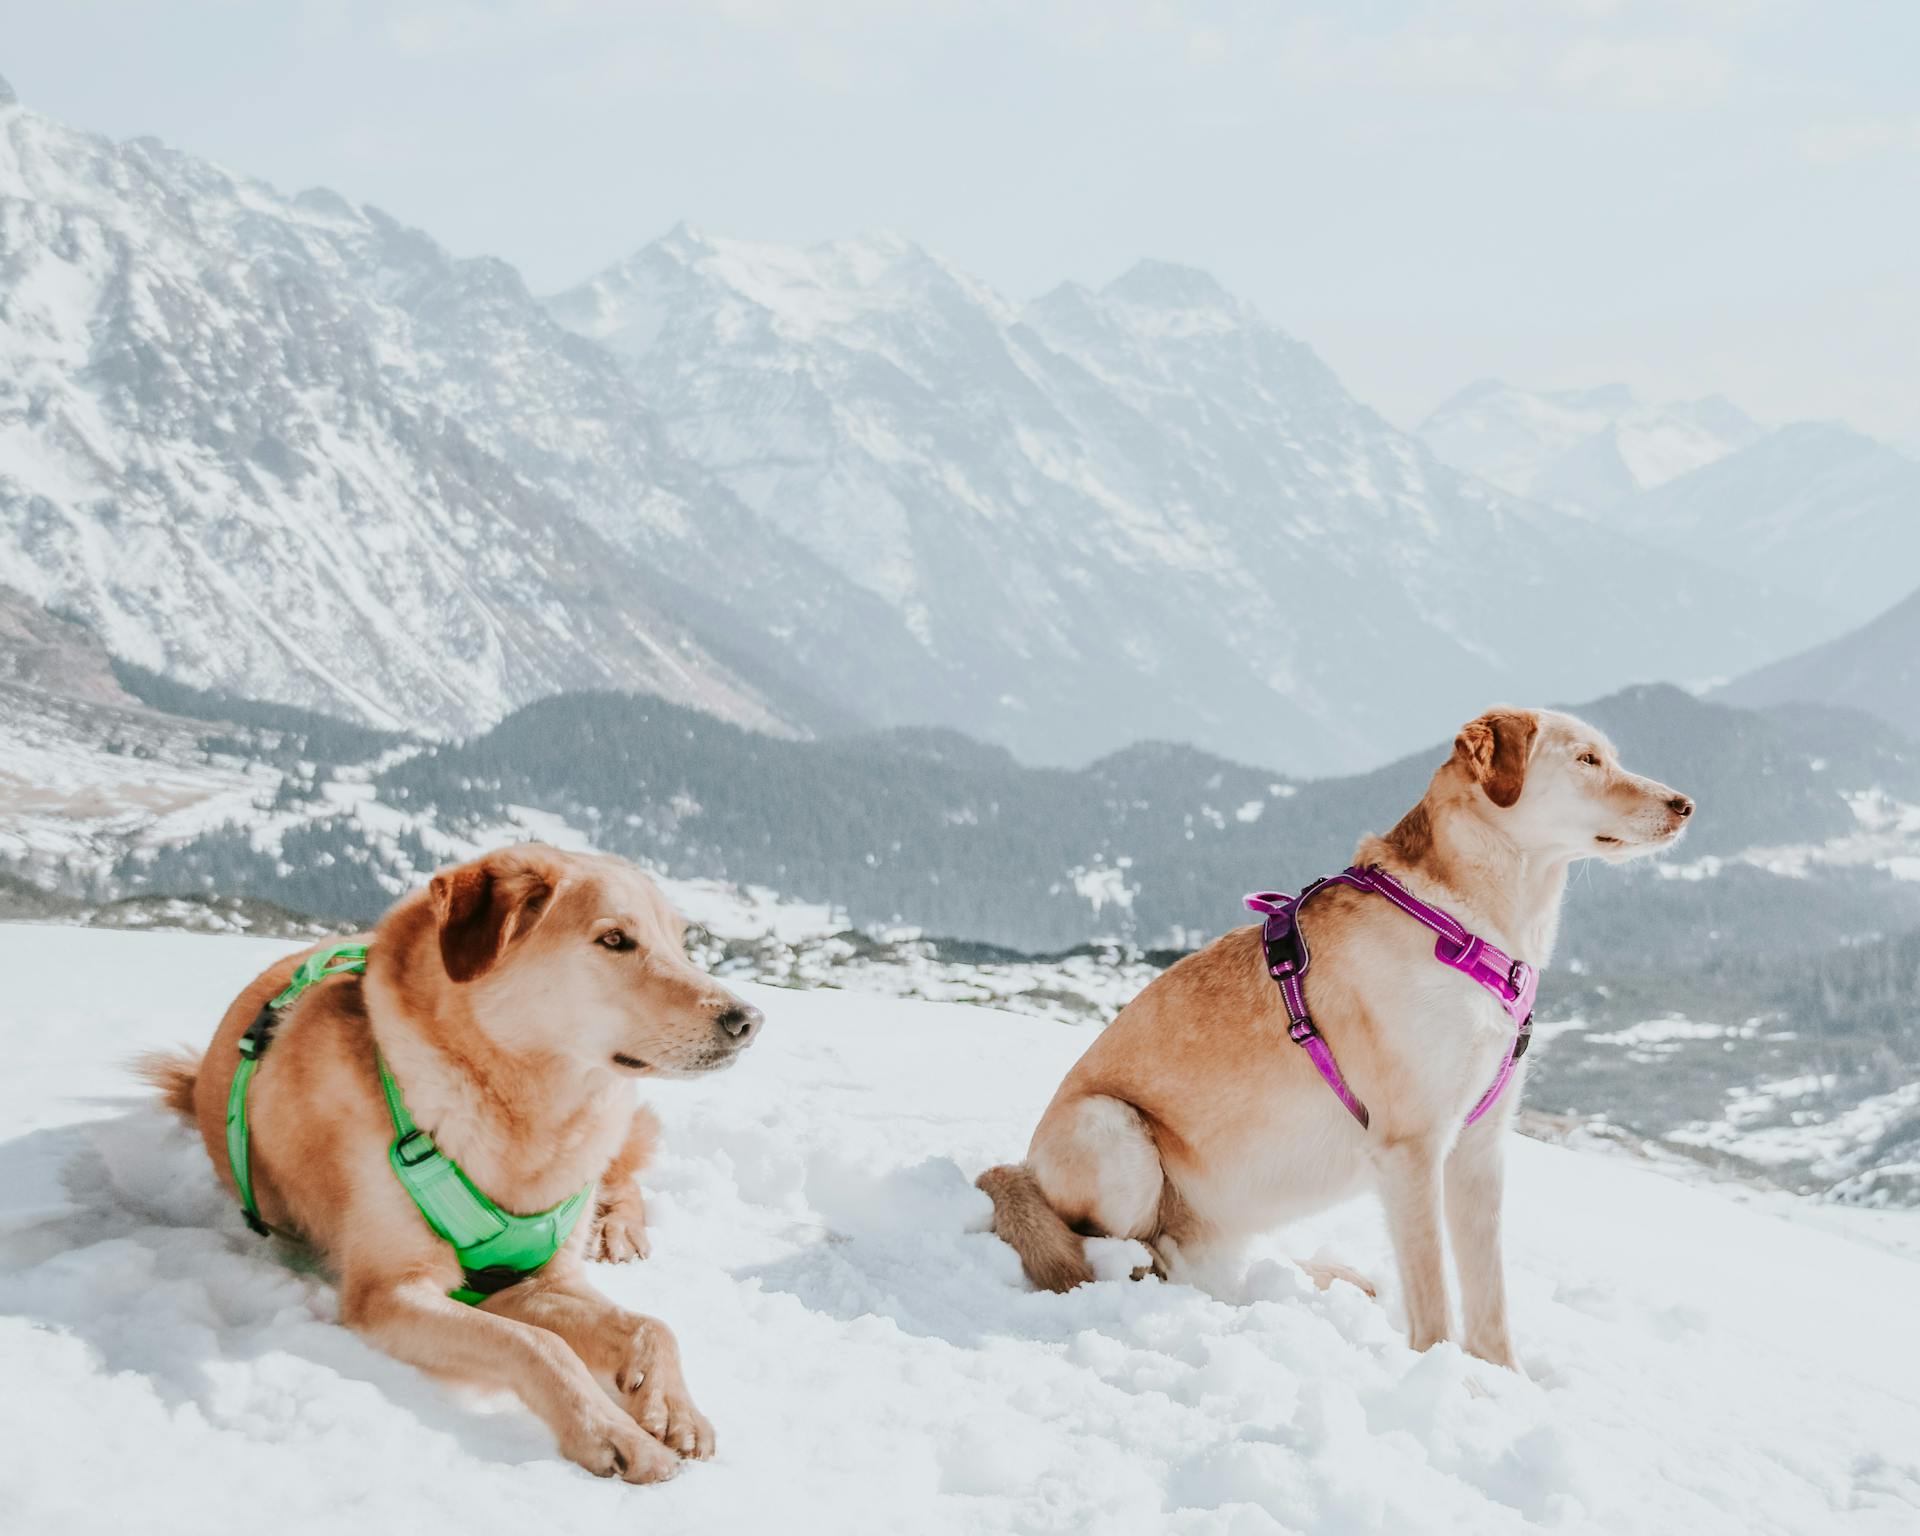 Dogs in Colorful Harnesses Sitting on Snow in Mountains